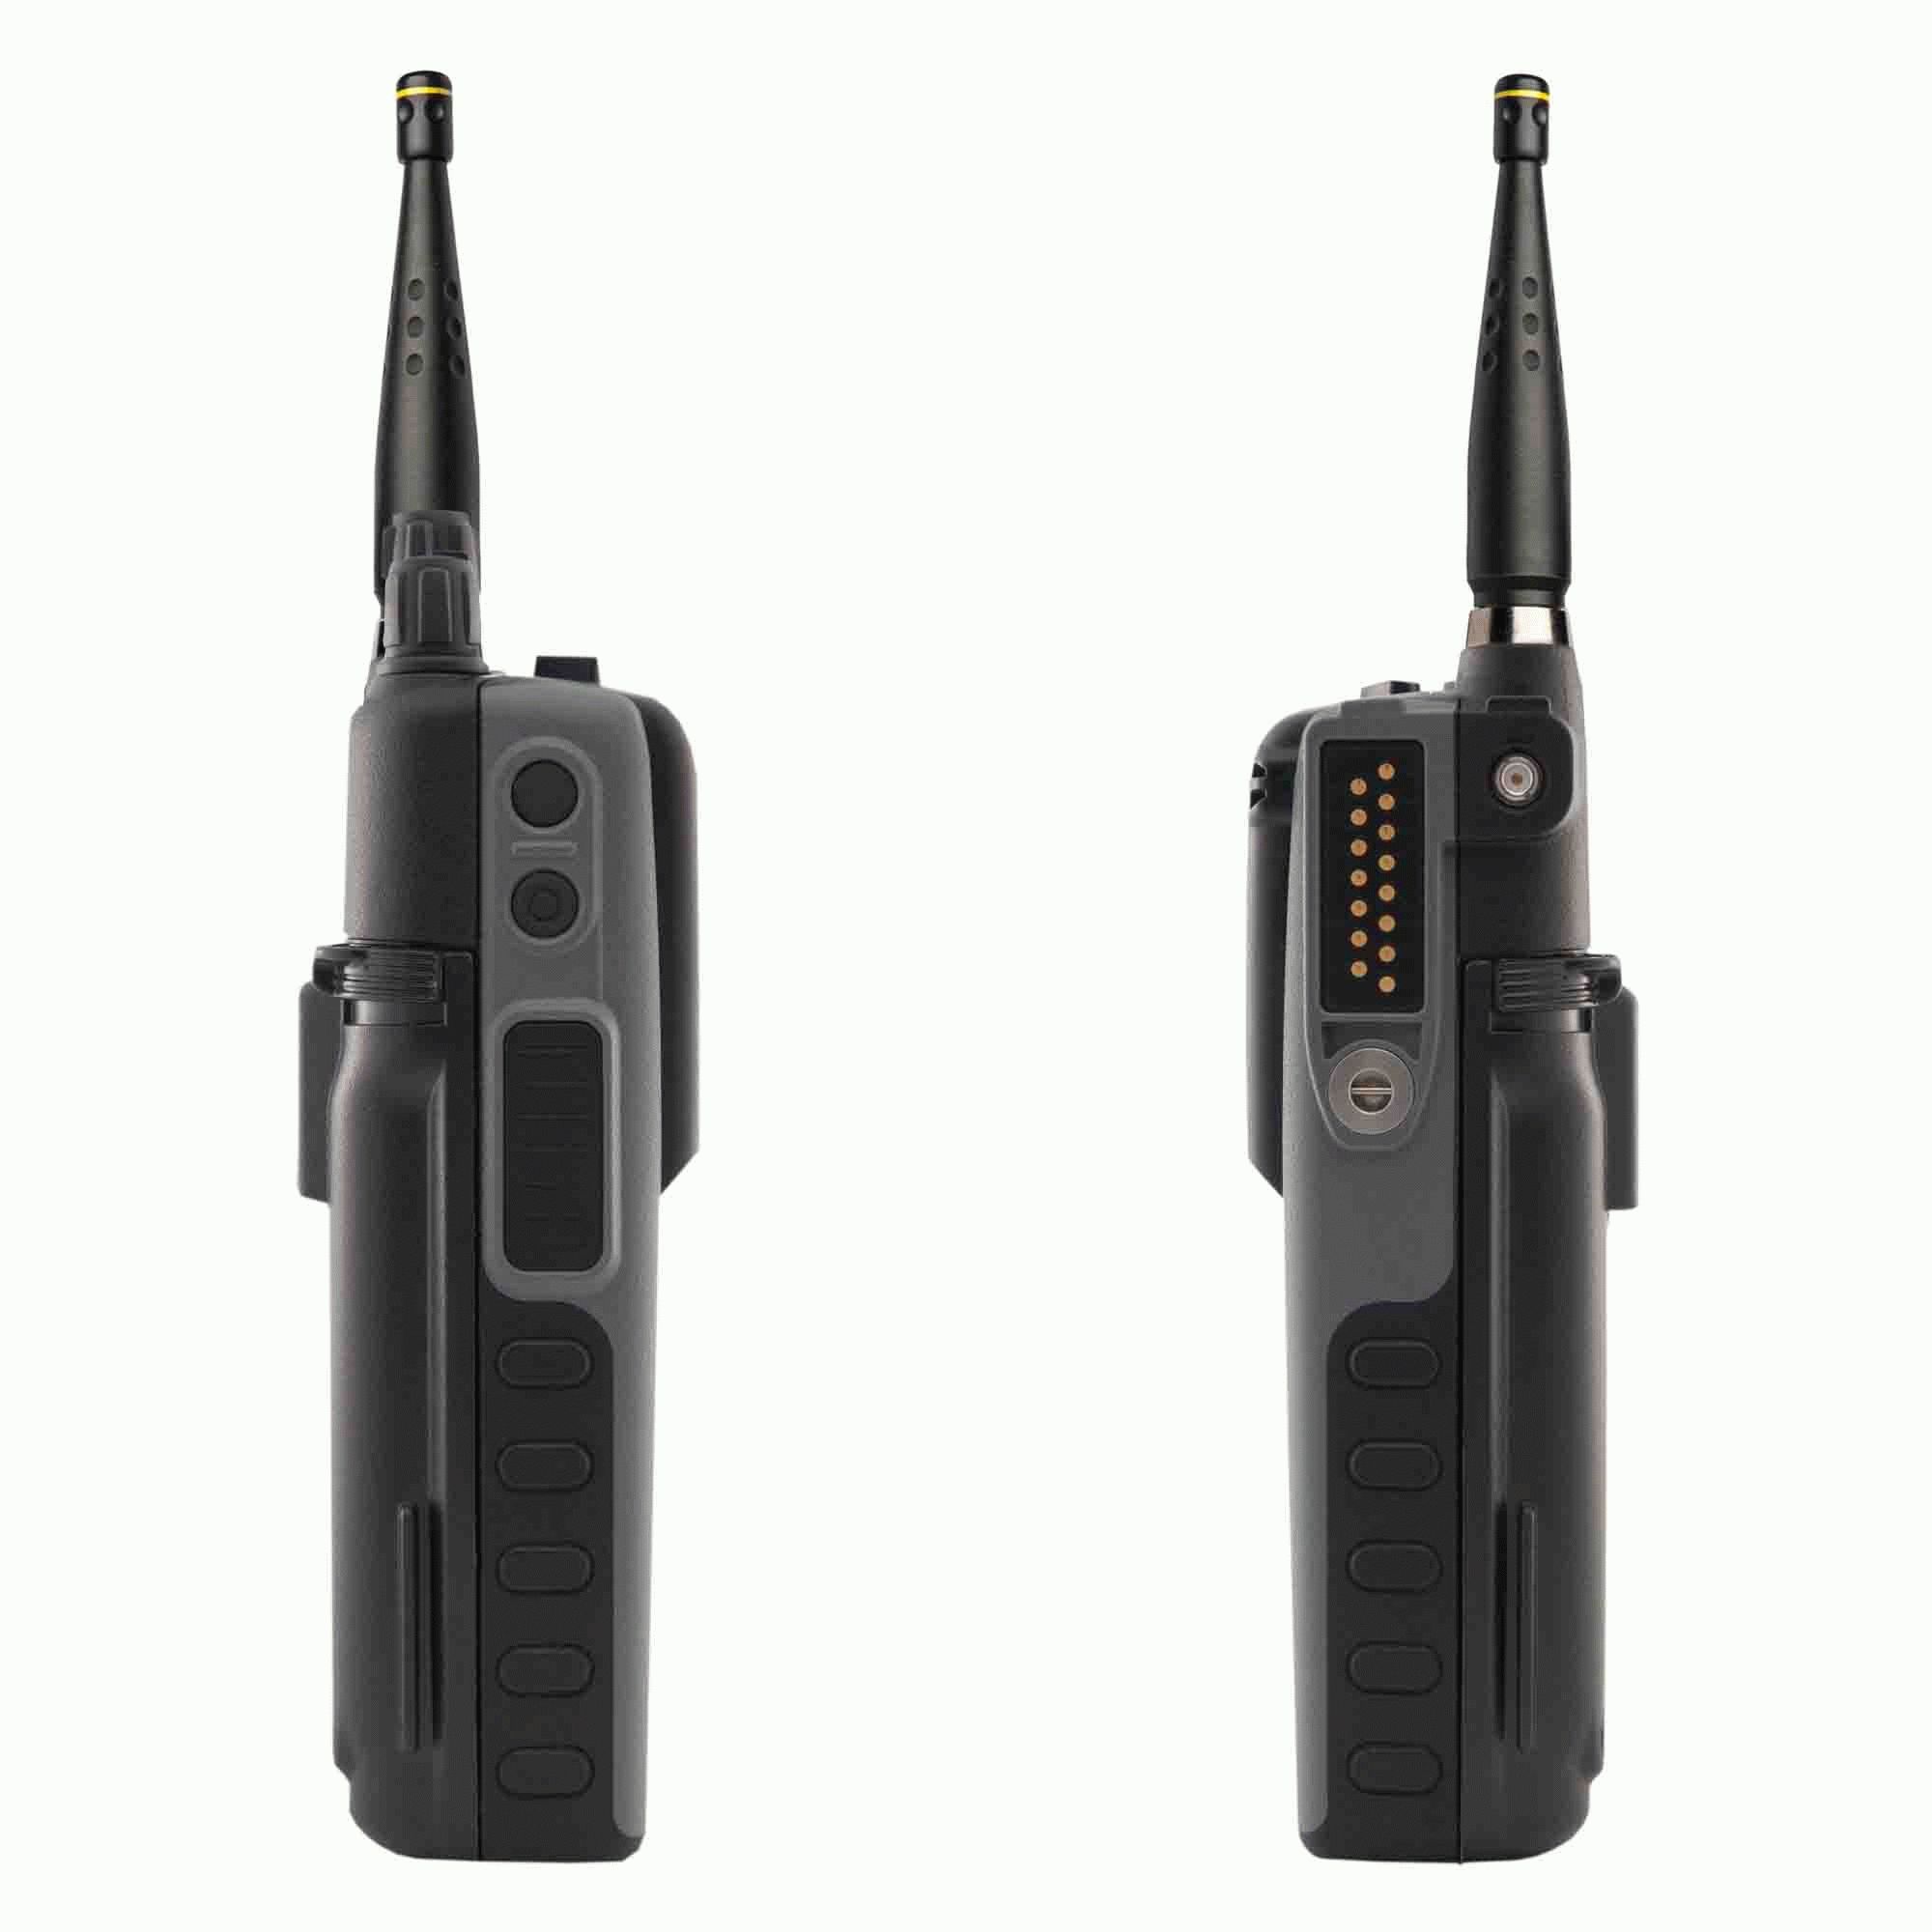 Rating of the best walkie-talkies and radio stations in 2020